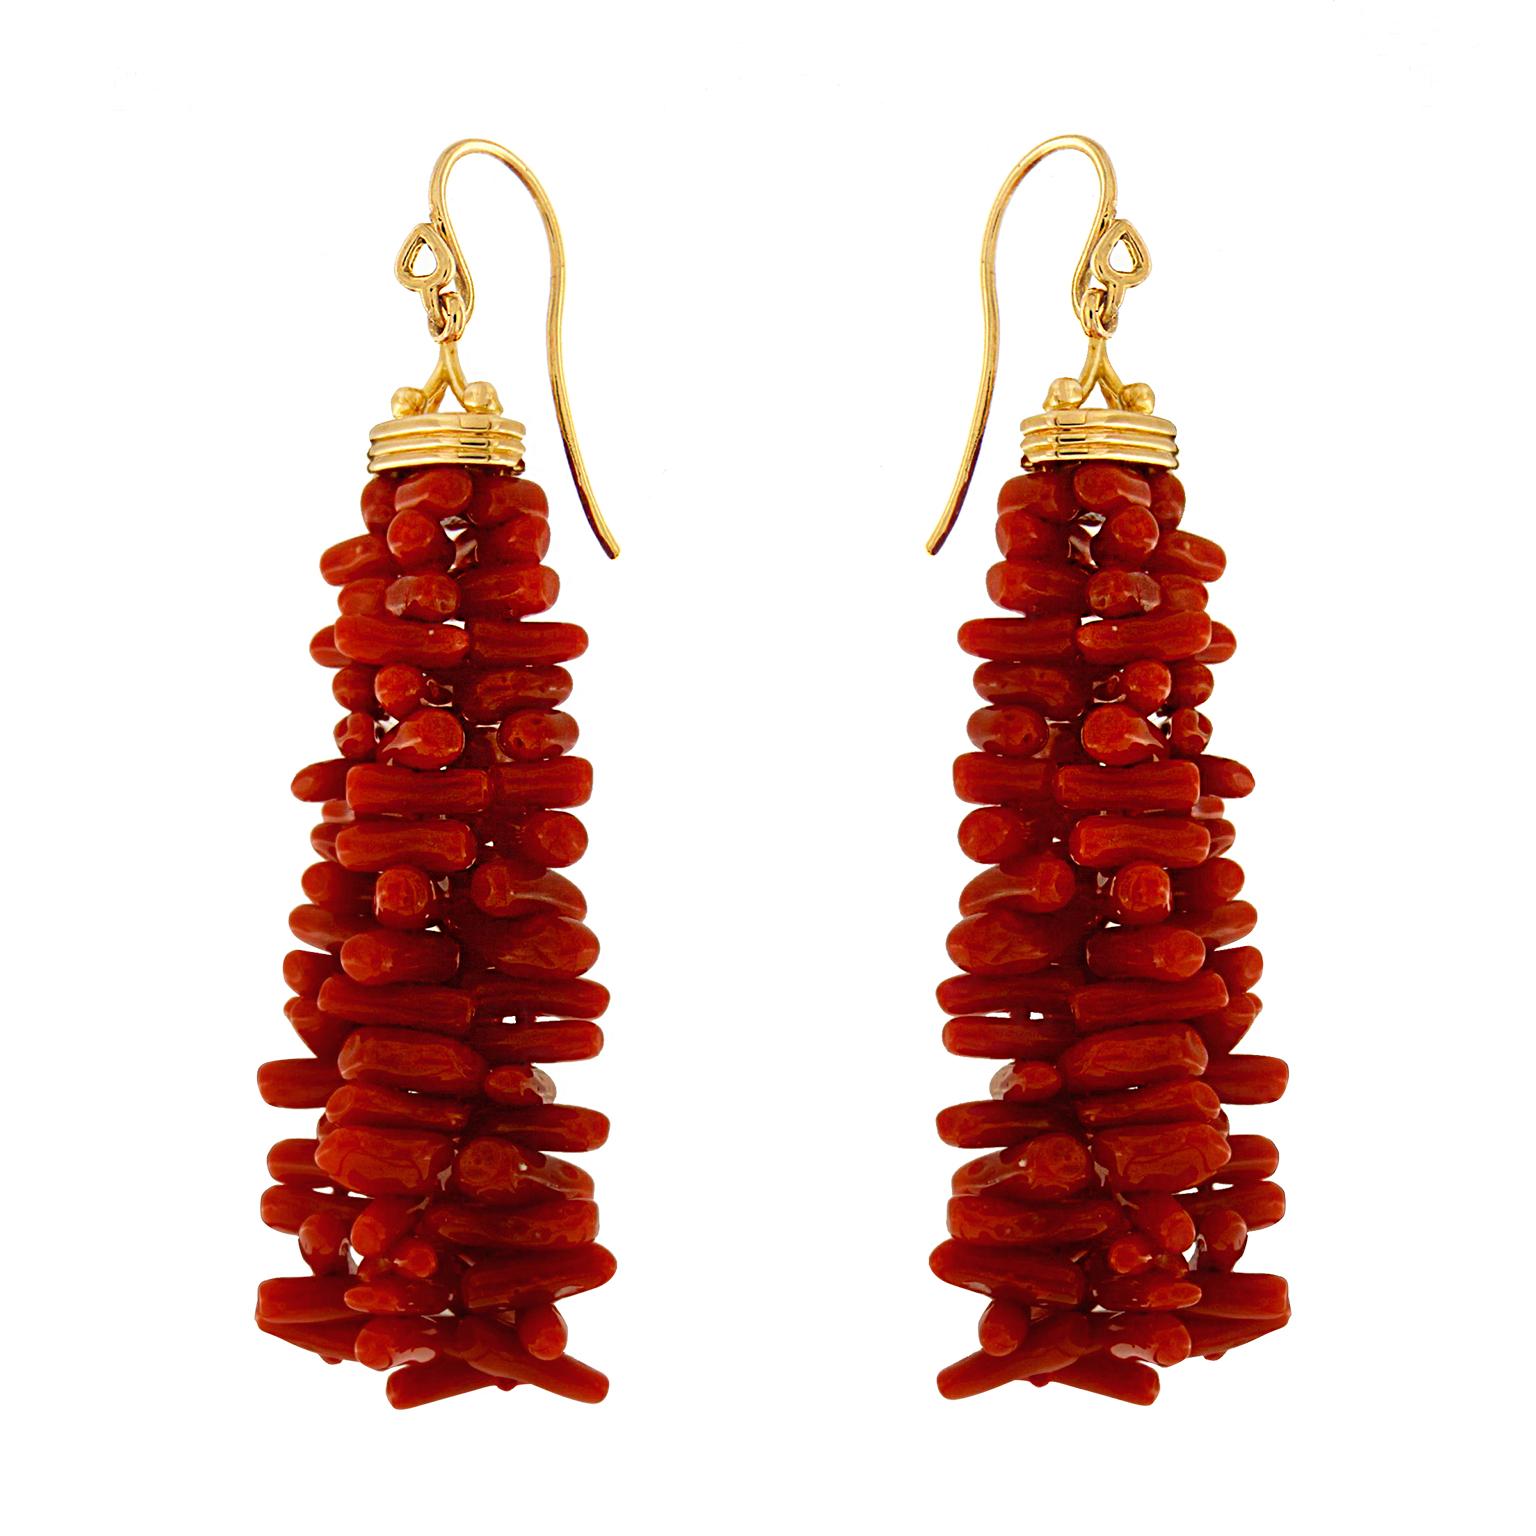 This unique pair of earrings features 18kt yellow gold signature Crown Cap with 3 strands of Sardinian Coral tassels and french hook.